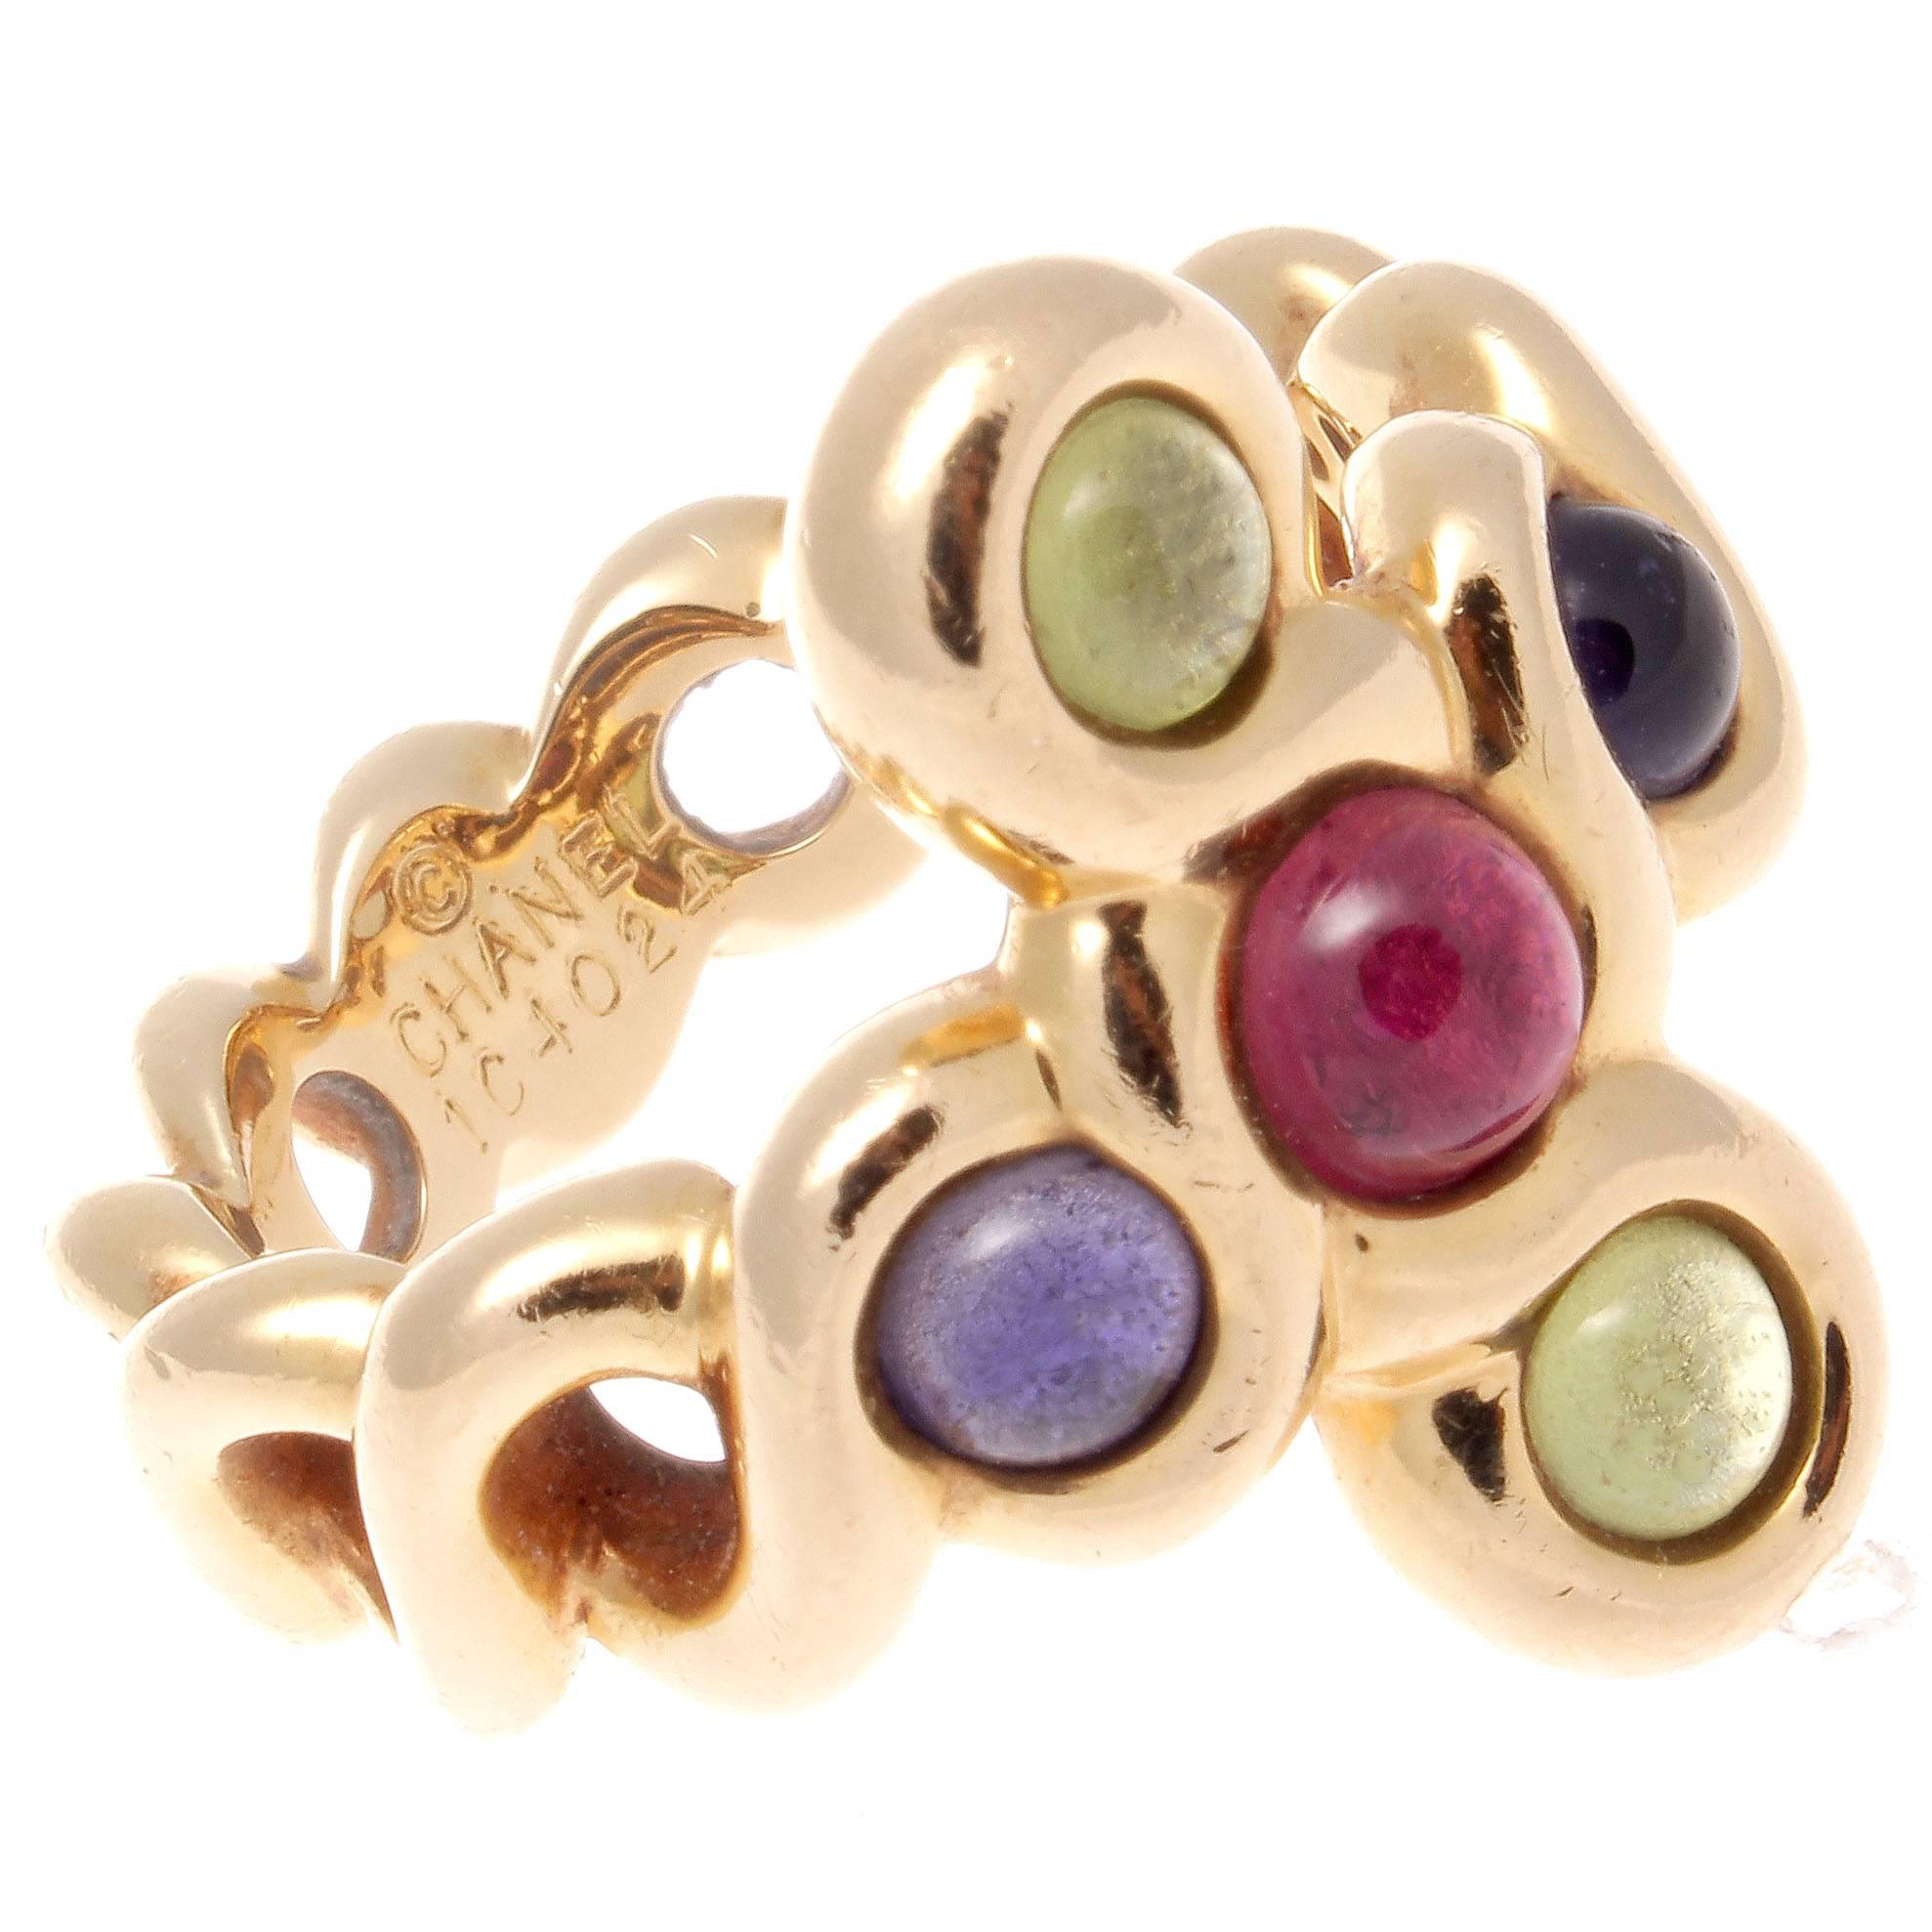 Created as a circular cross pattern the Chanel ring features cabochons of tourmalines and amethyst. Hand crafted in 18k gold signed Chanel with serial numbers. 